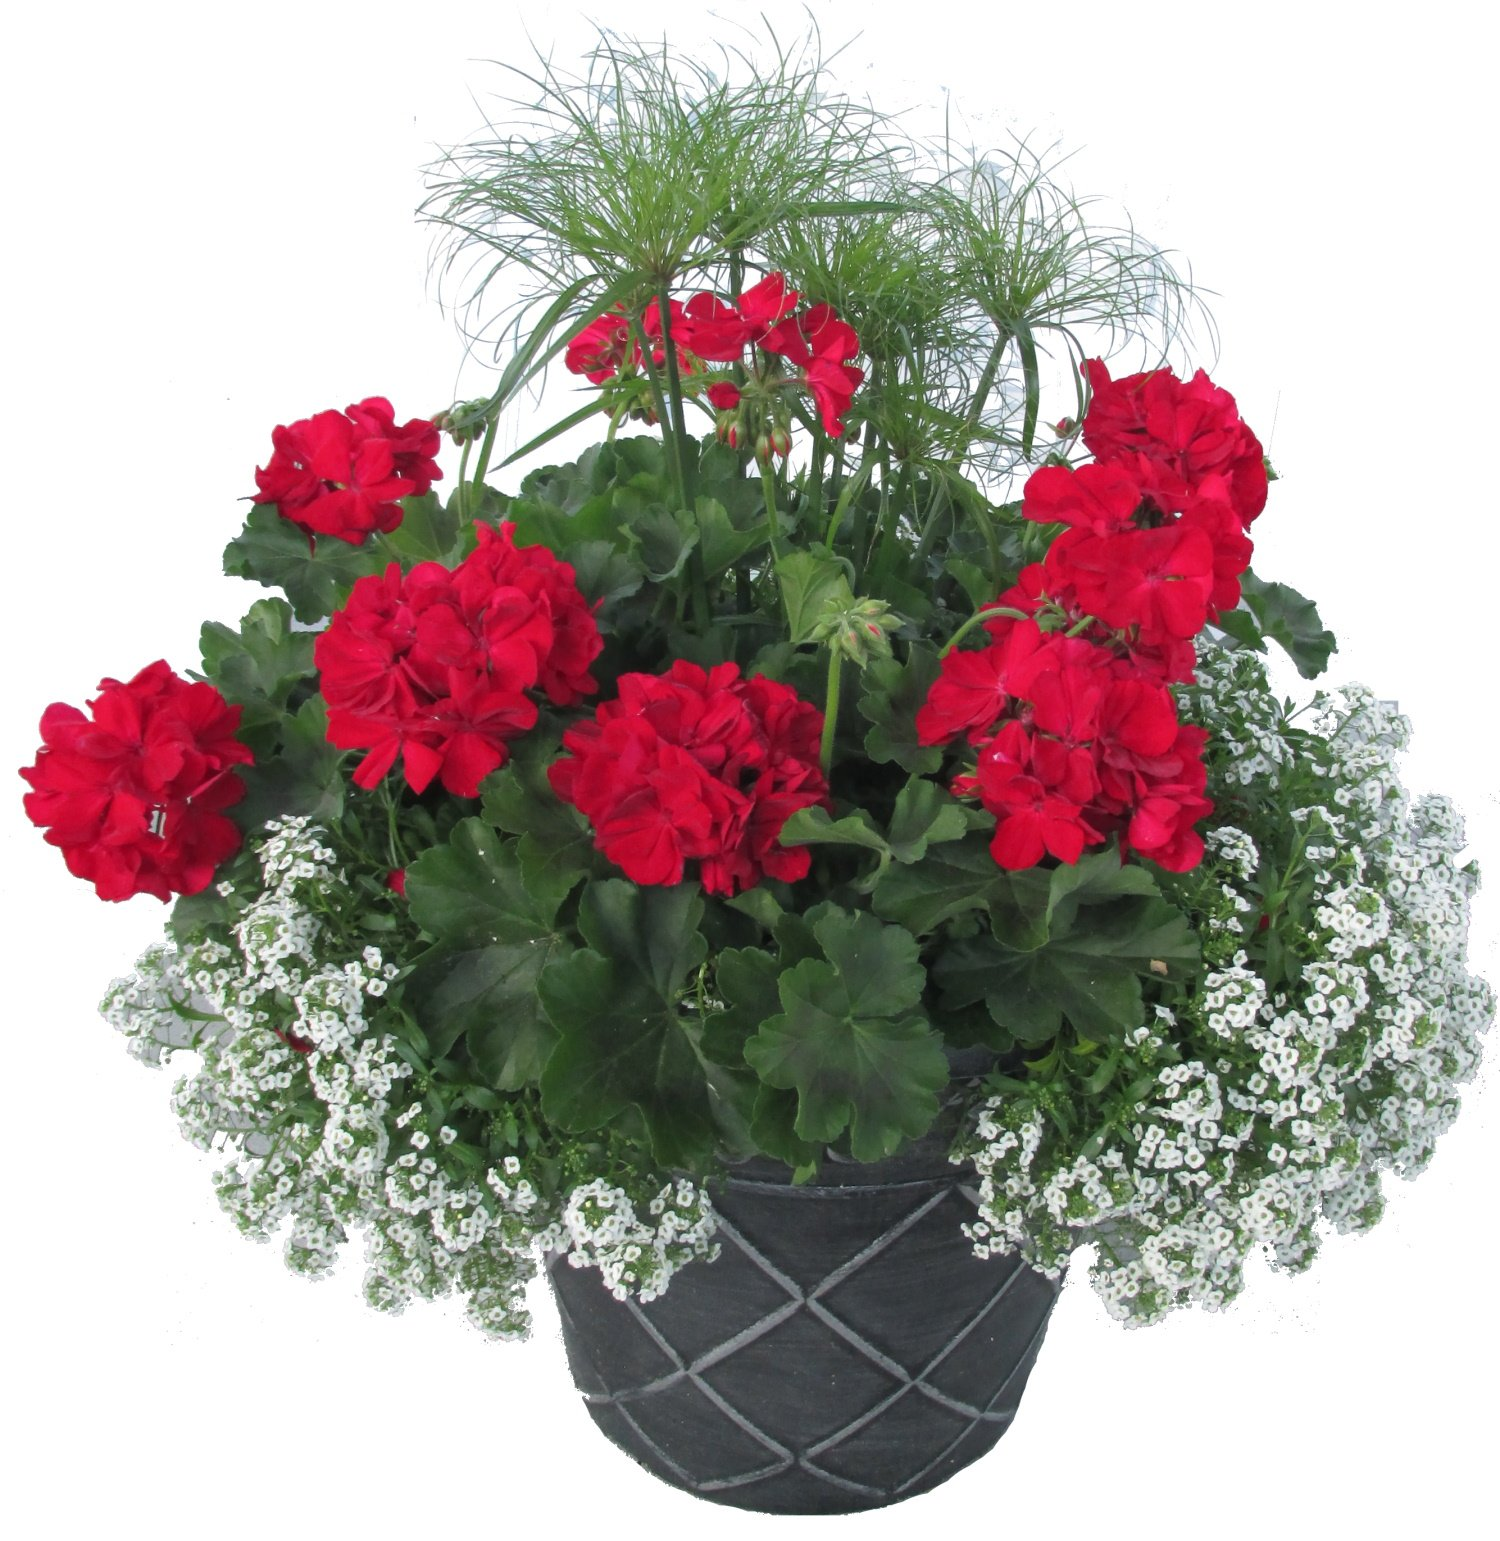 Flower planters for sale